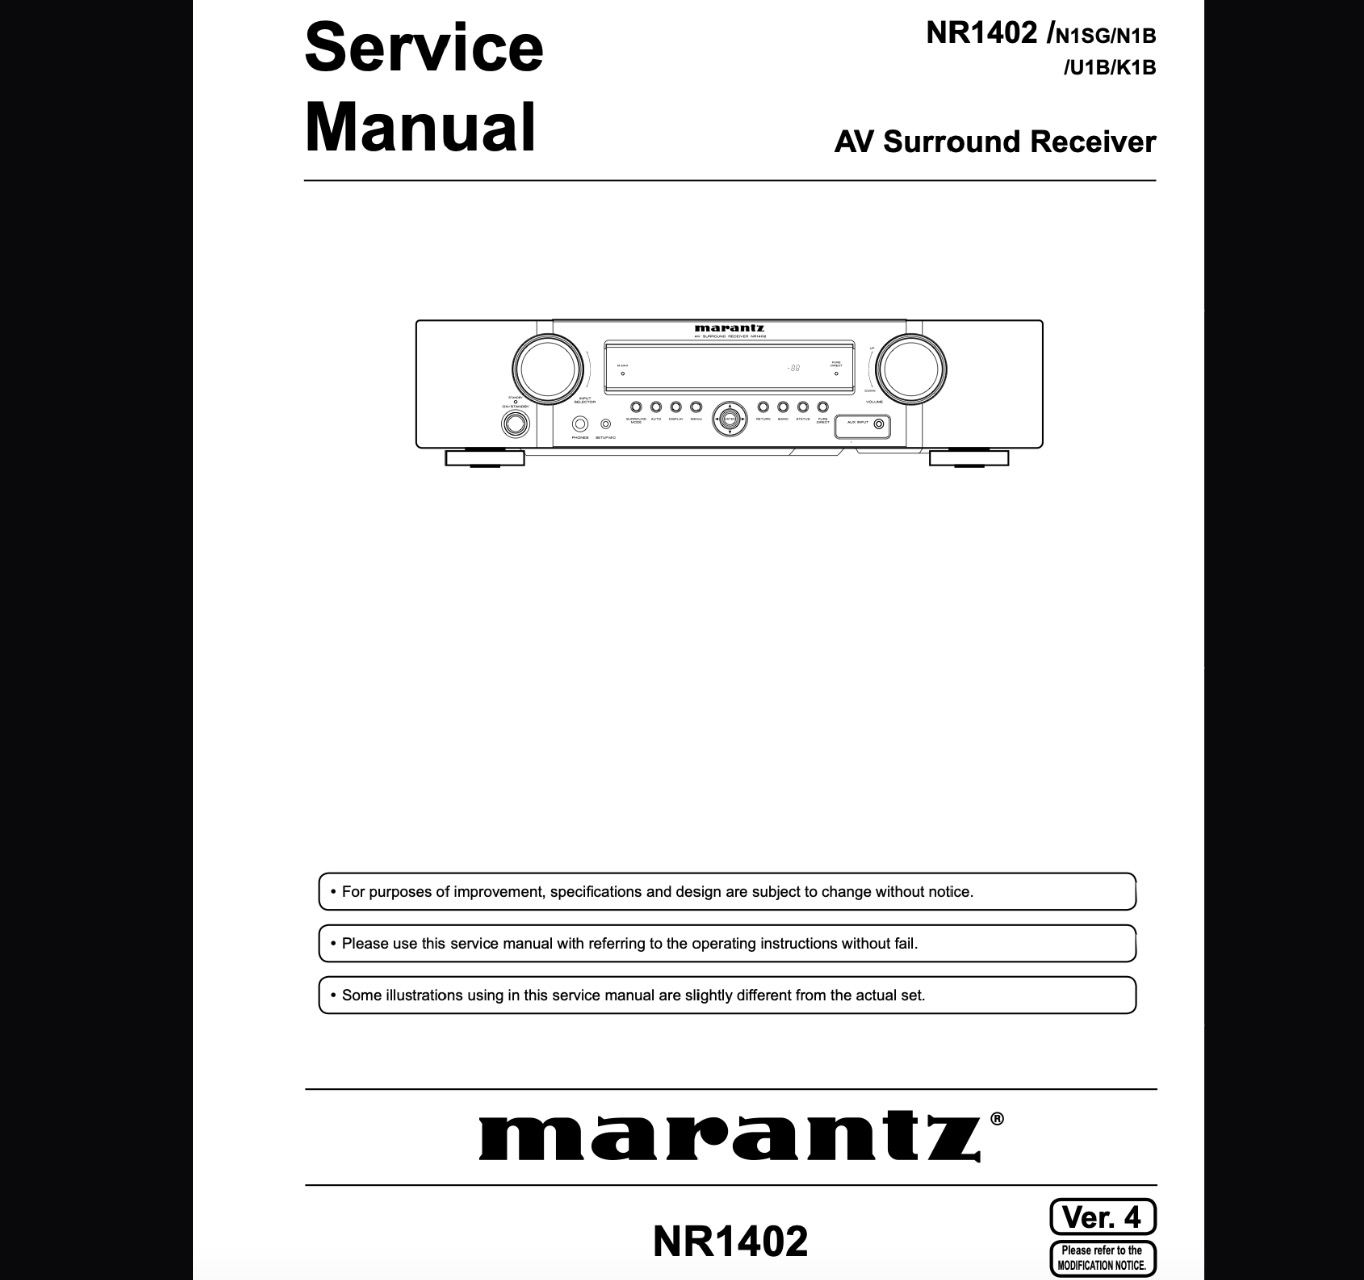 Marantz NR1402 AV Surround Receiver Service Manual, Parts List, Exploded View, Wiring and Schematic Diagram